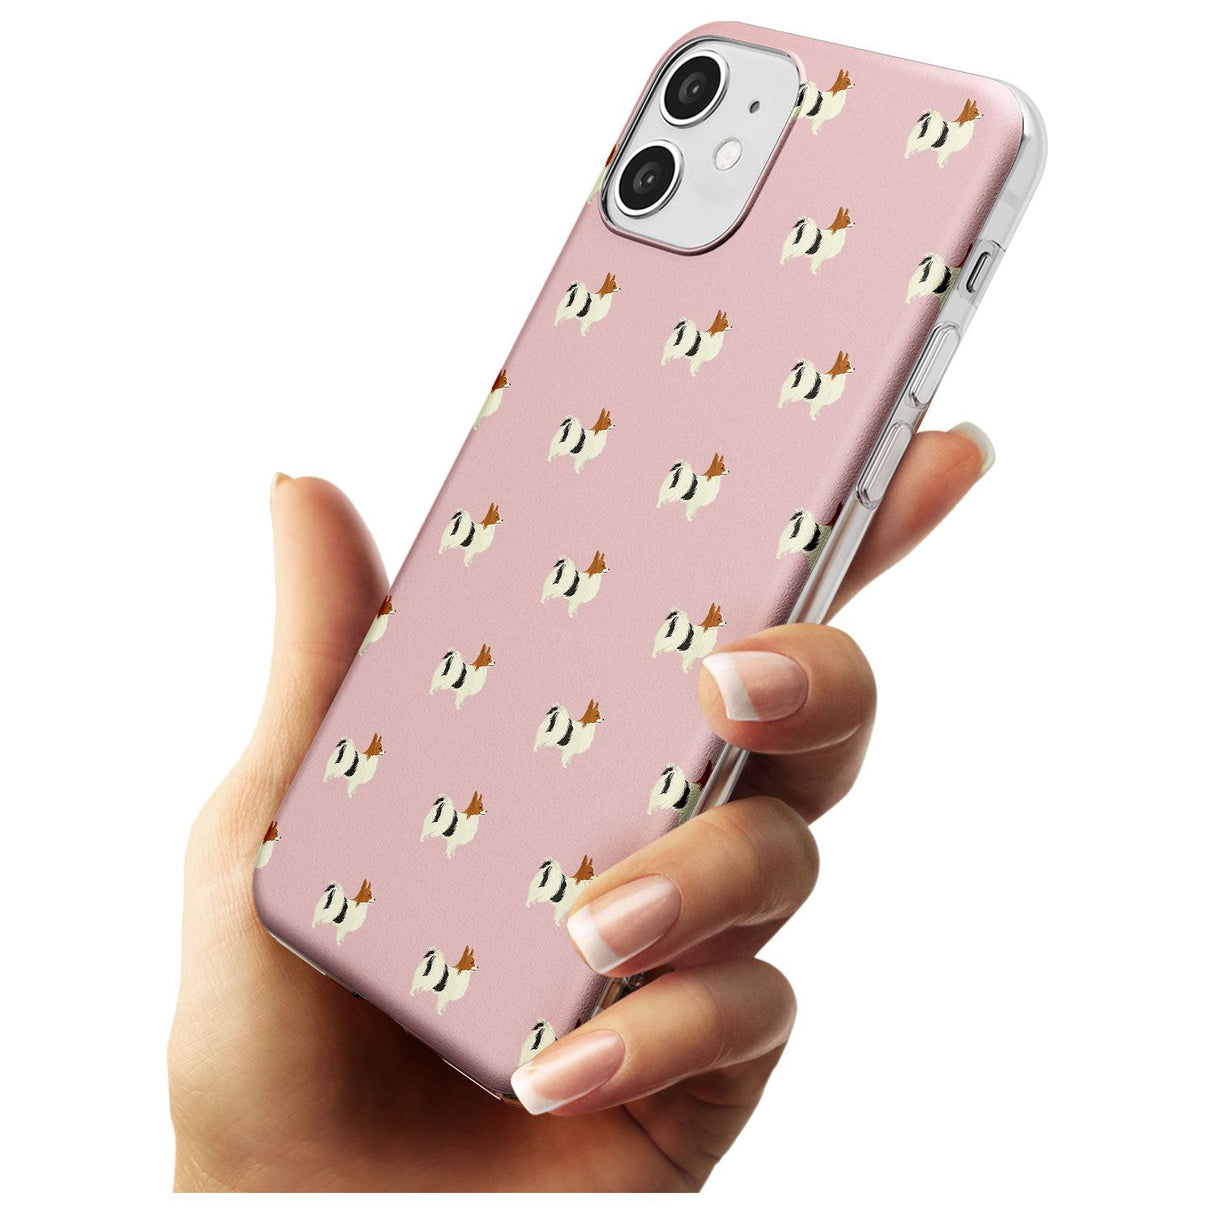 Papillon Dog Pattern Slim TPU Phone Case for iPhone 11